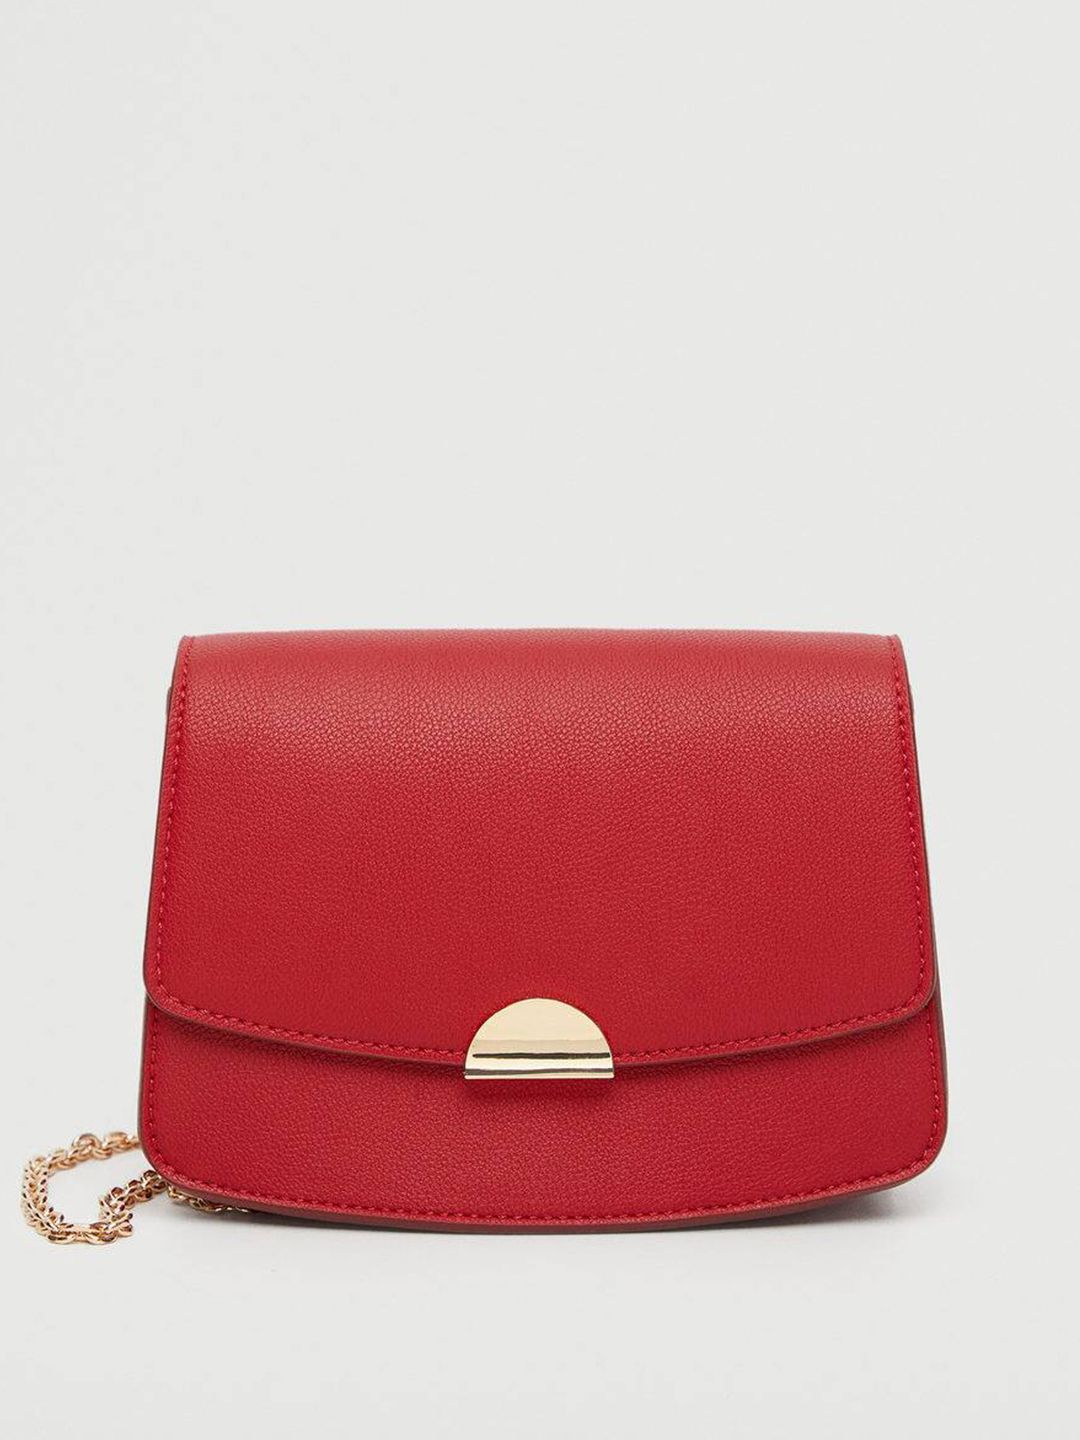 MANGO Red & Gold-Toned Solid Structured Sling Bag Price in India